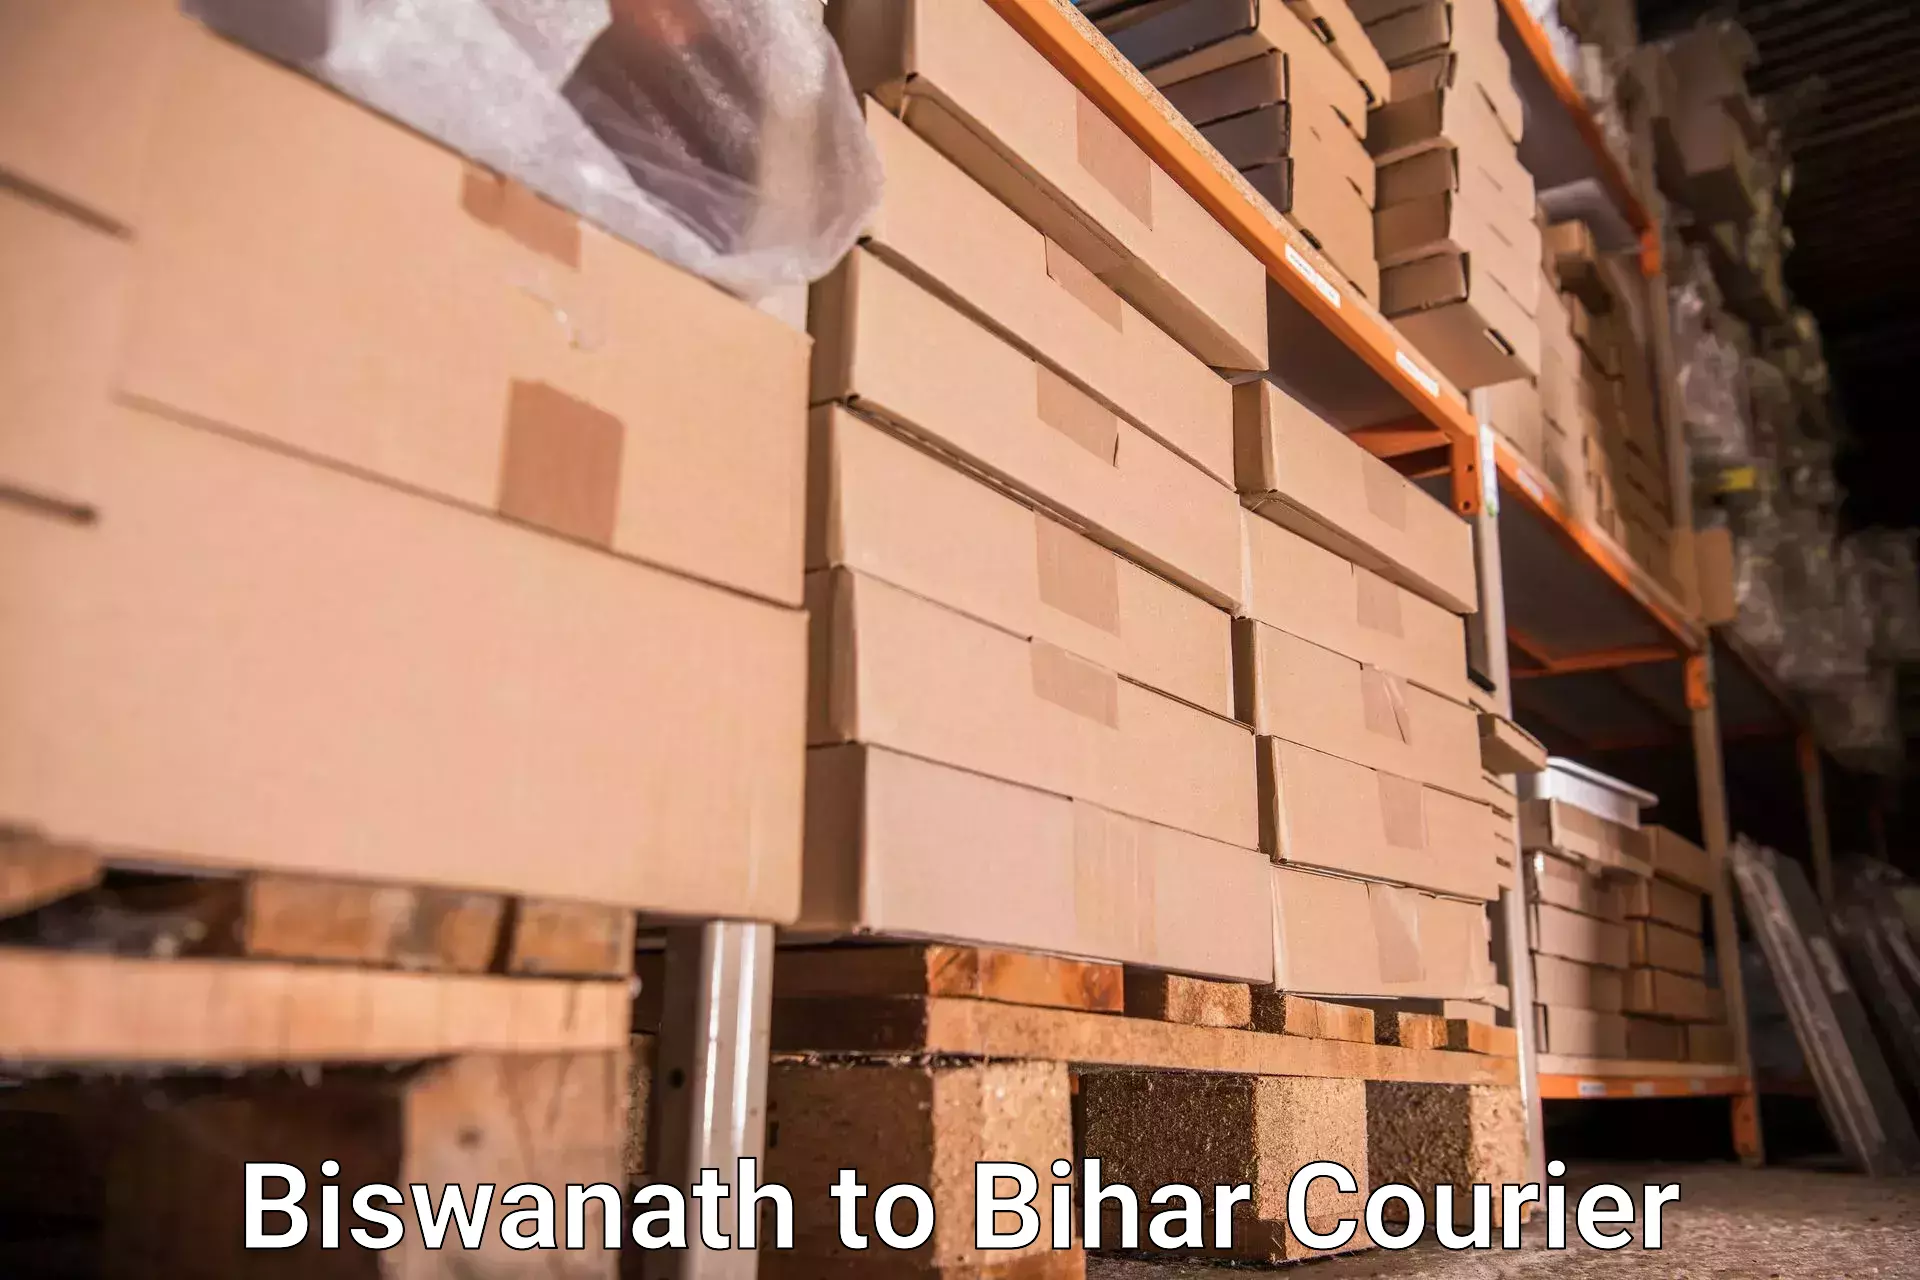 Baggage shipping experience in Biswanath to Jhanjharpur